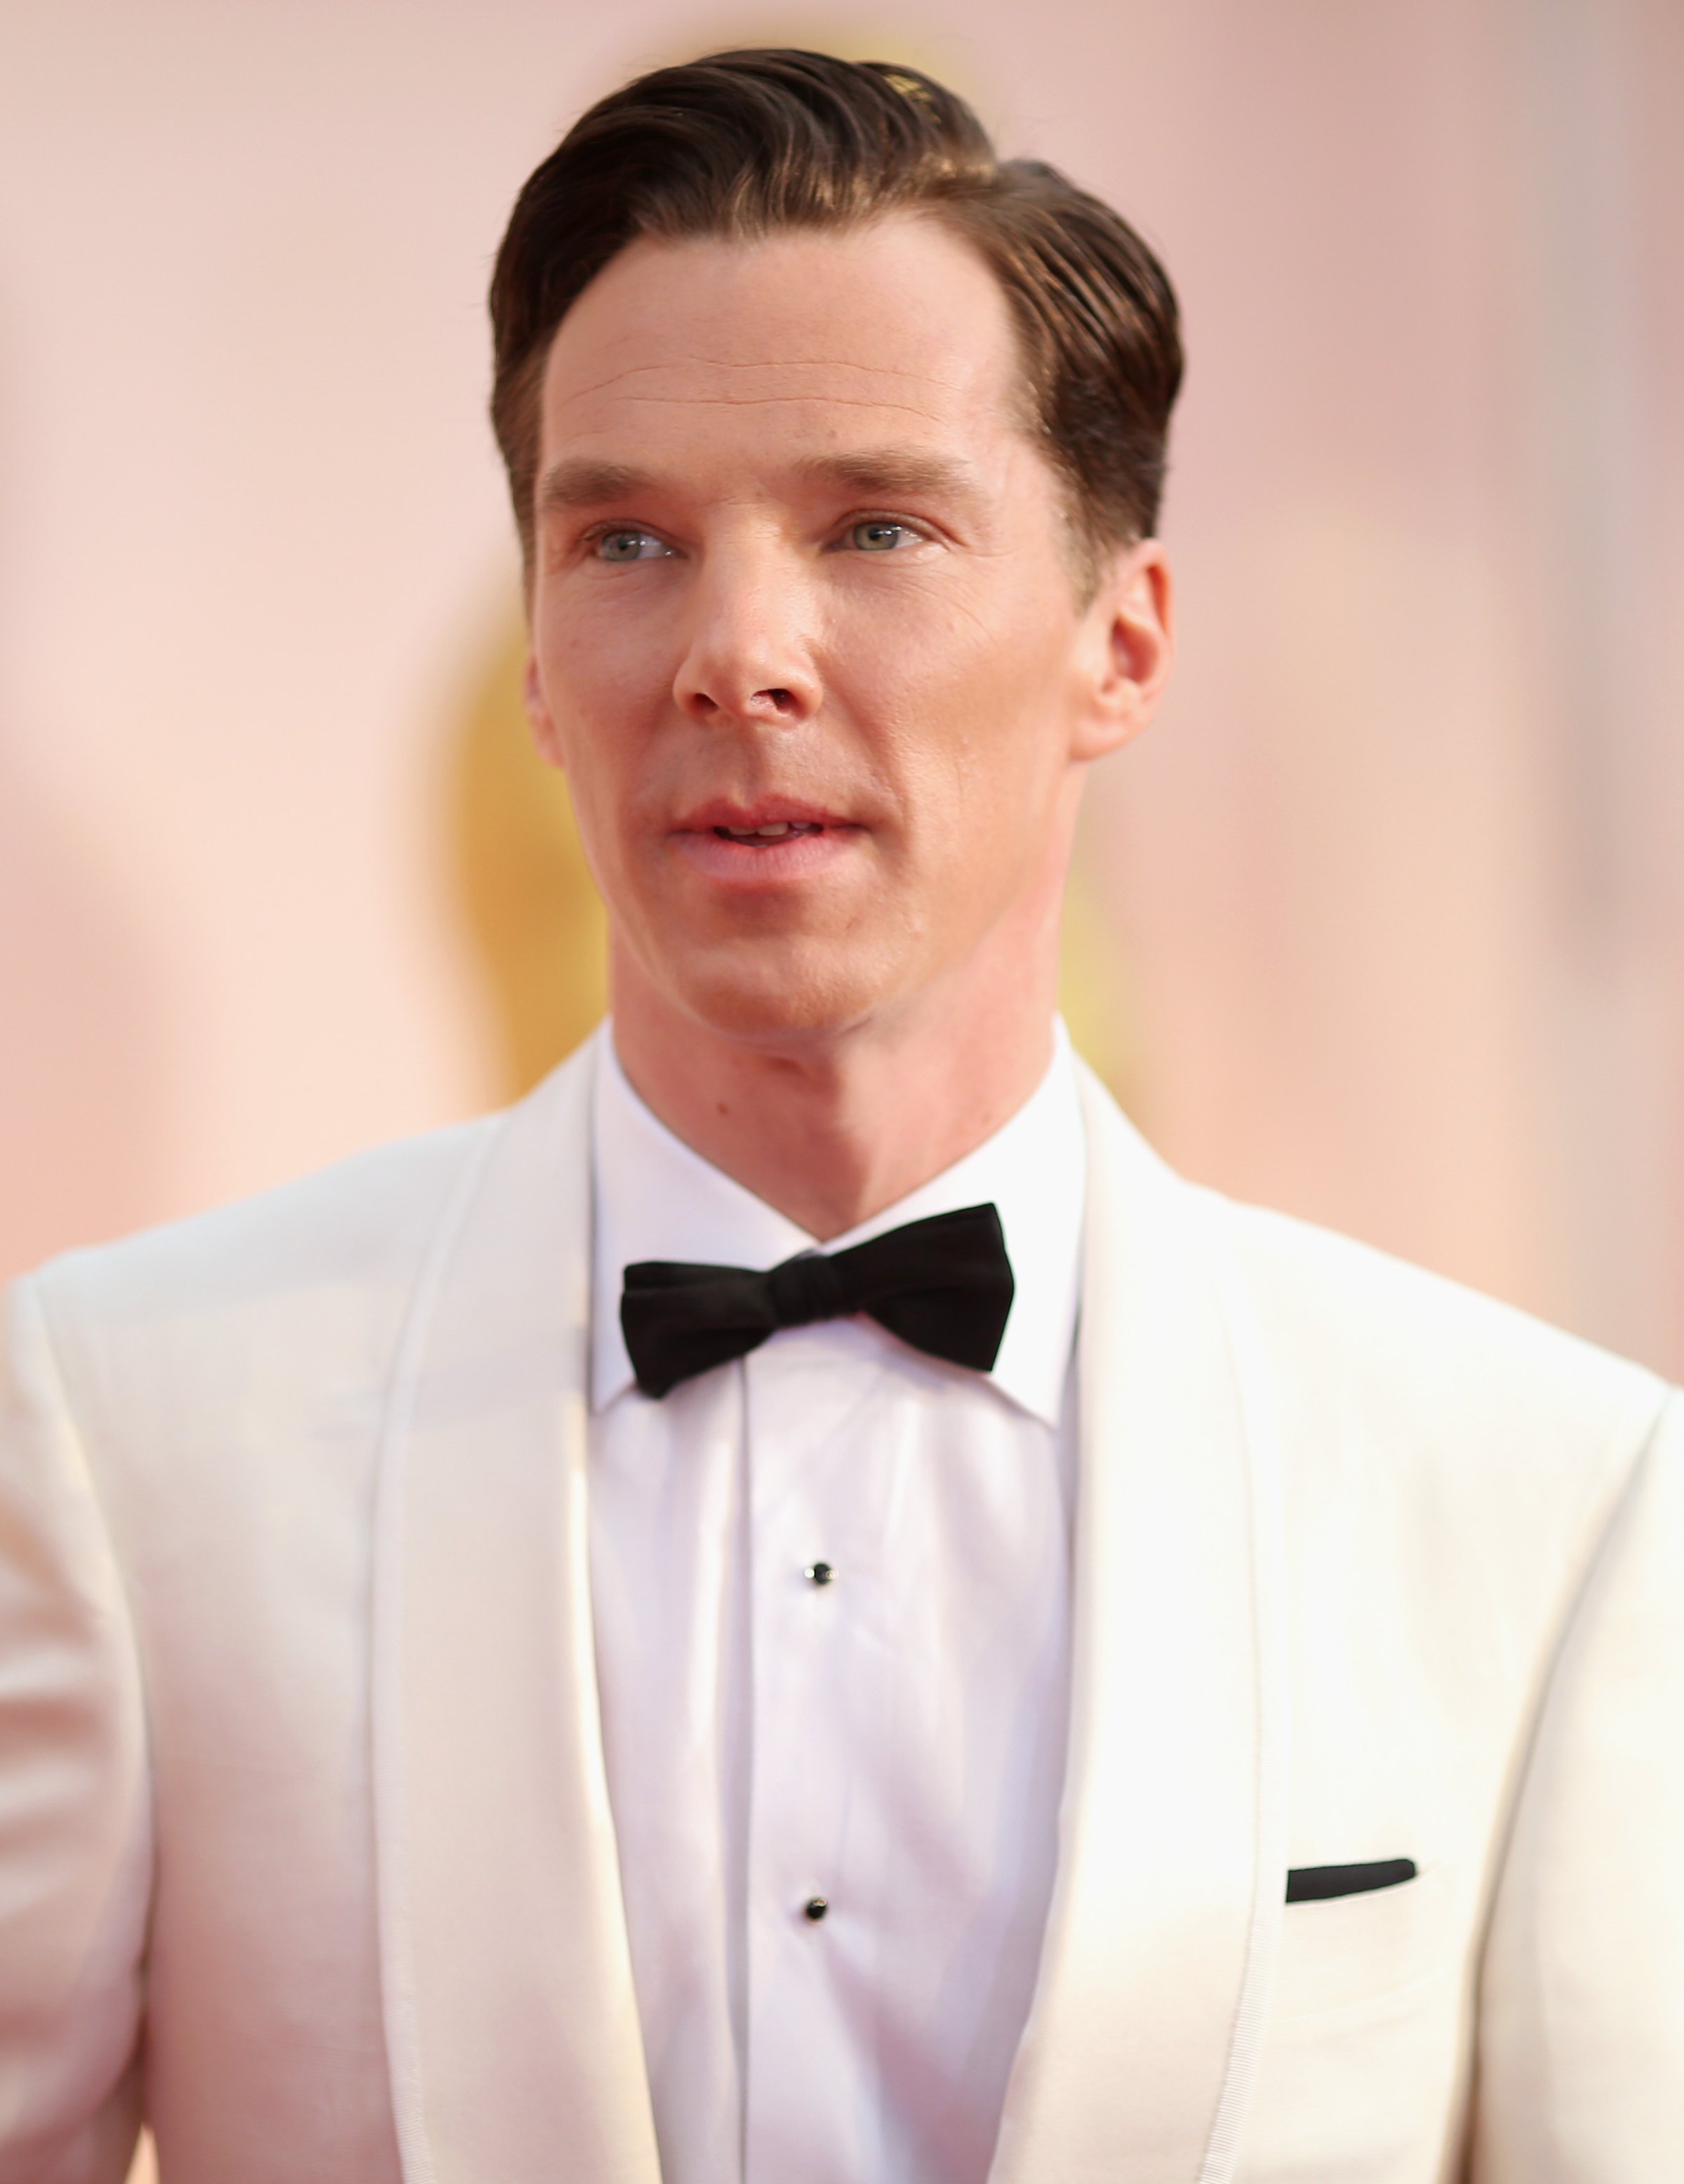 Actor Benedict Cumberbatch attends the 87th Annual Academy Awards in Hollywood, Calif. on Feb. 22, 2015.